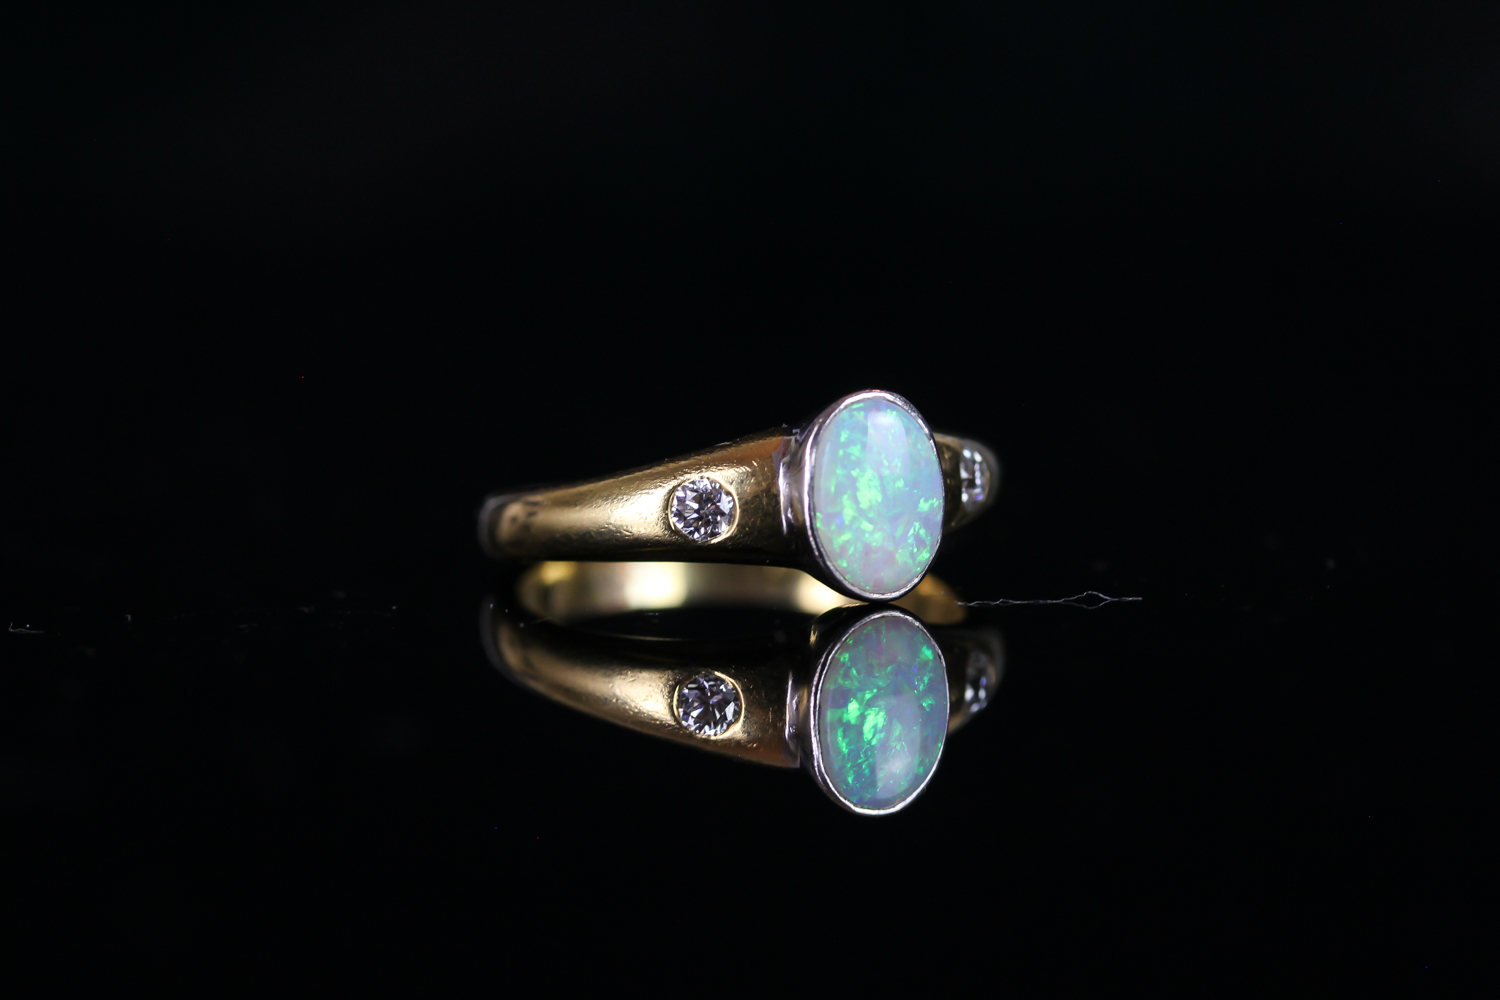 18CT OPAL AND DIAMOND RING, centre stone estimated 8x5mm, total weight 3.9 gms, size M. - Image 2 of 3